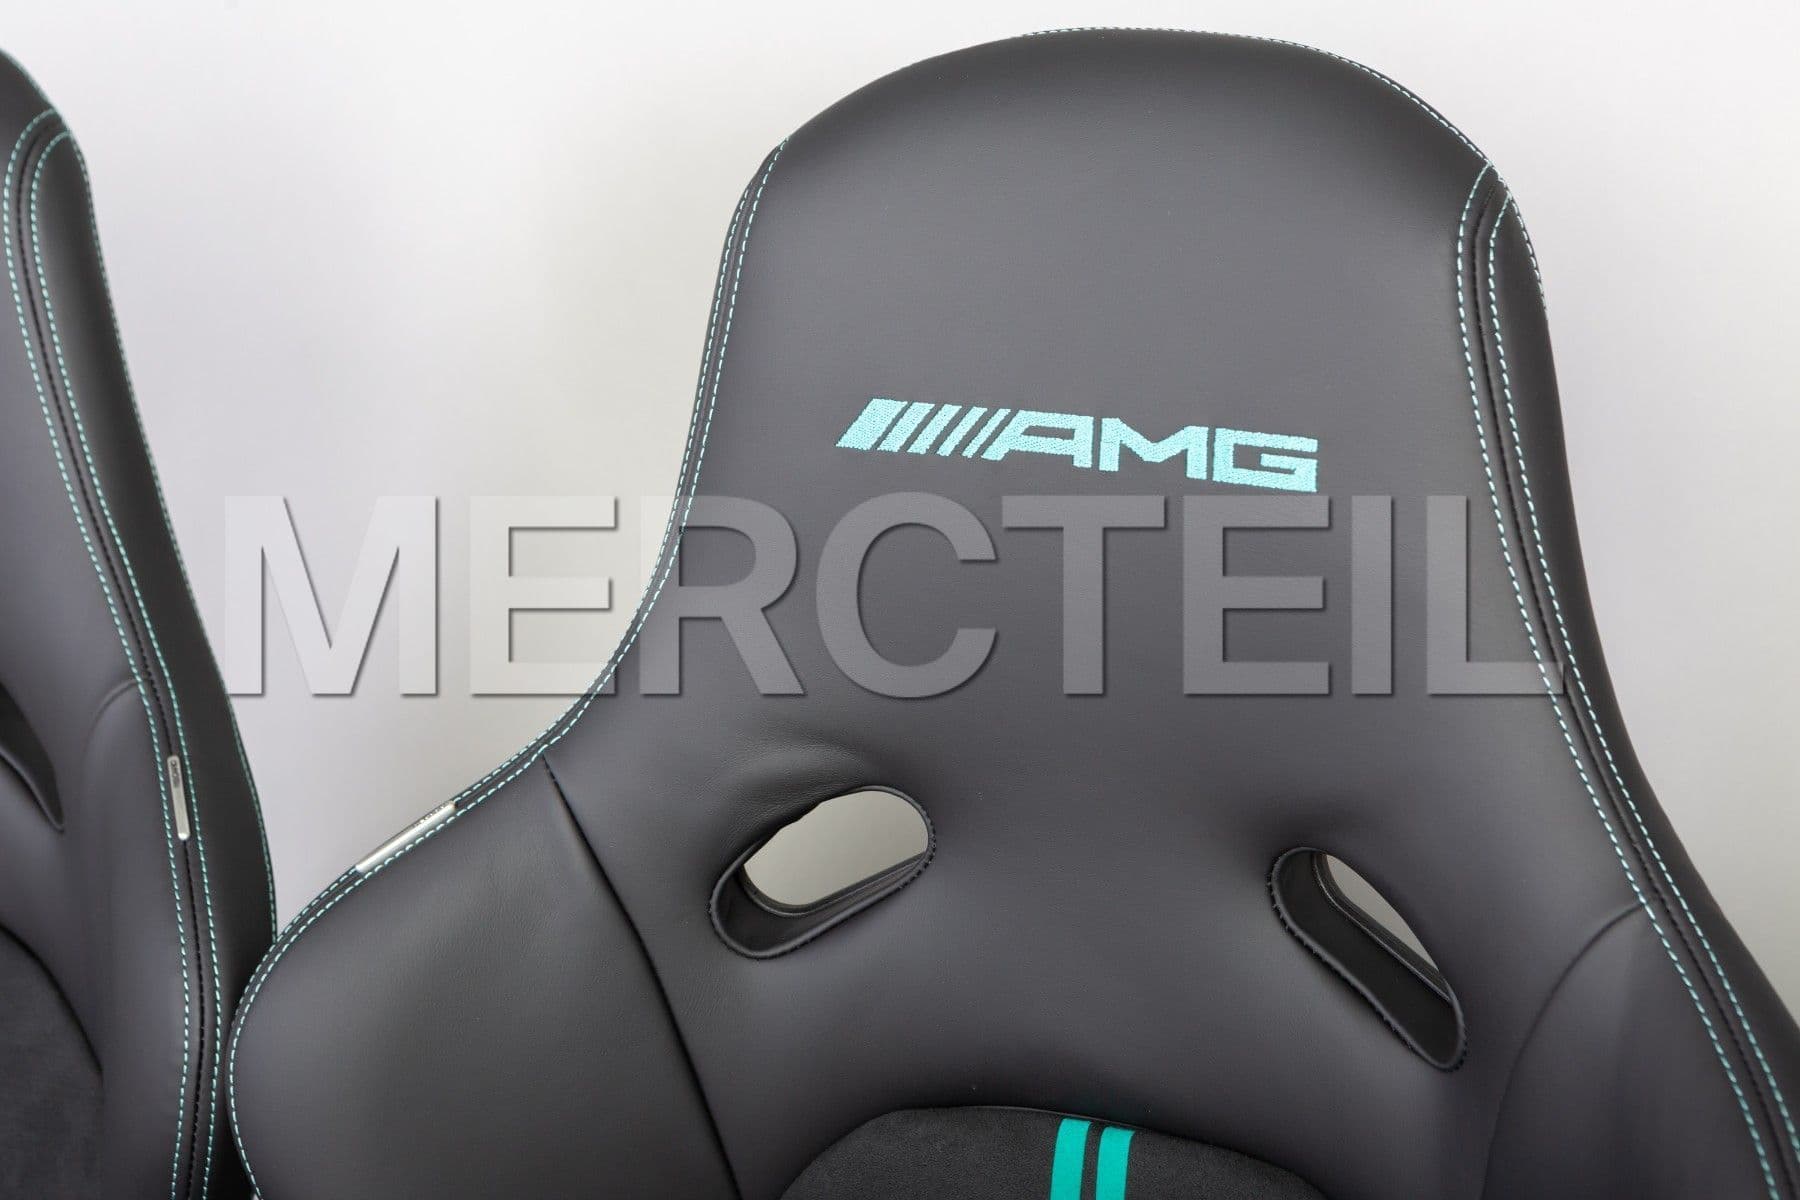 AMG GT Black Series P One Edition Seats Genuine Mercedes AMG (part number: A1909105103)